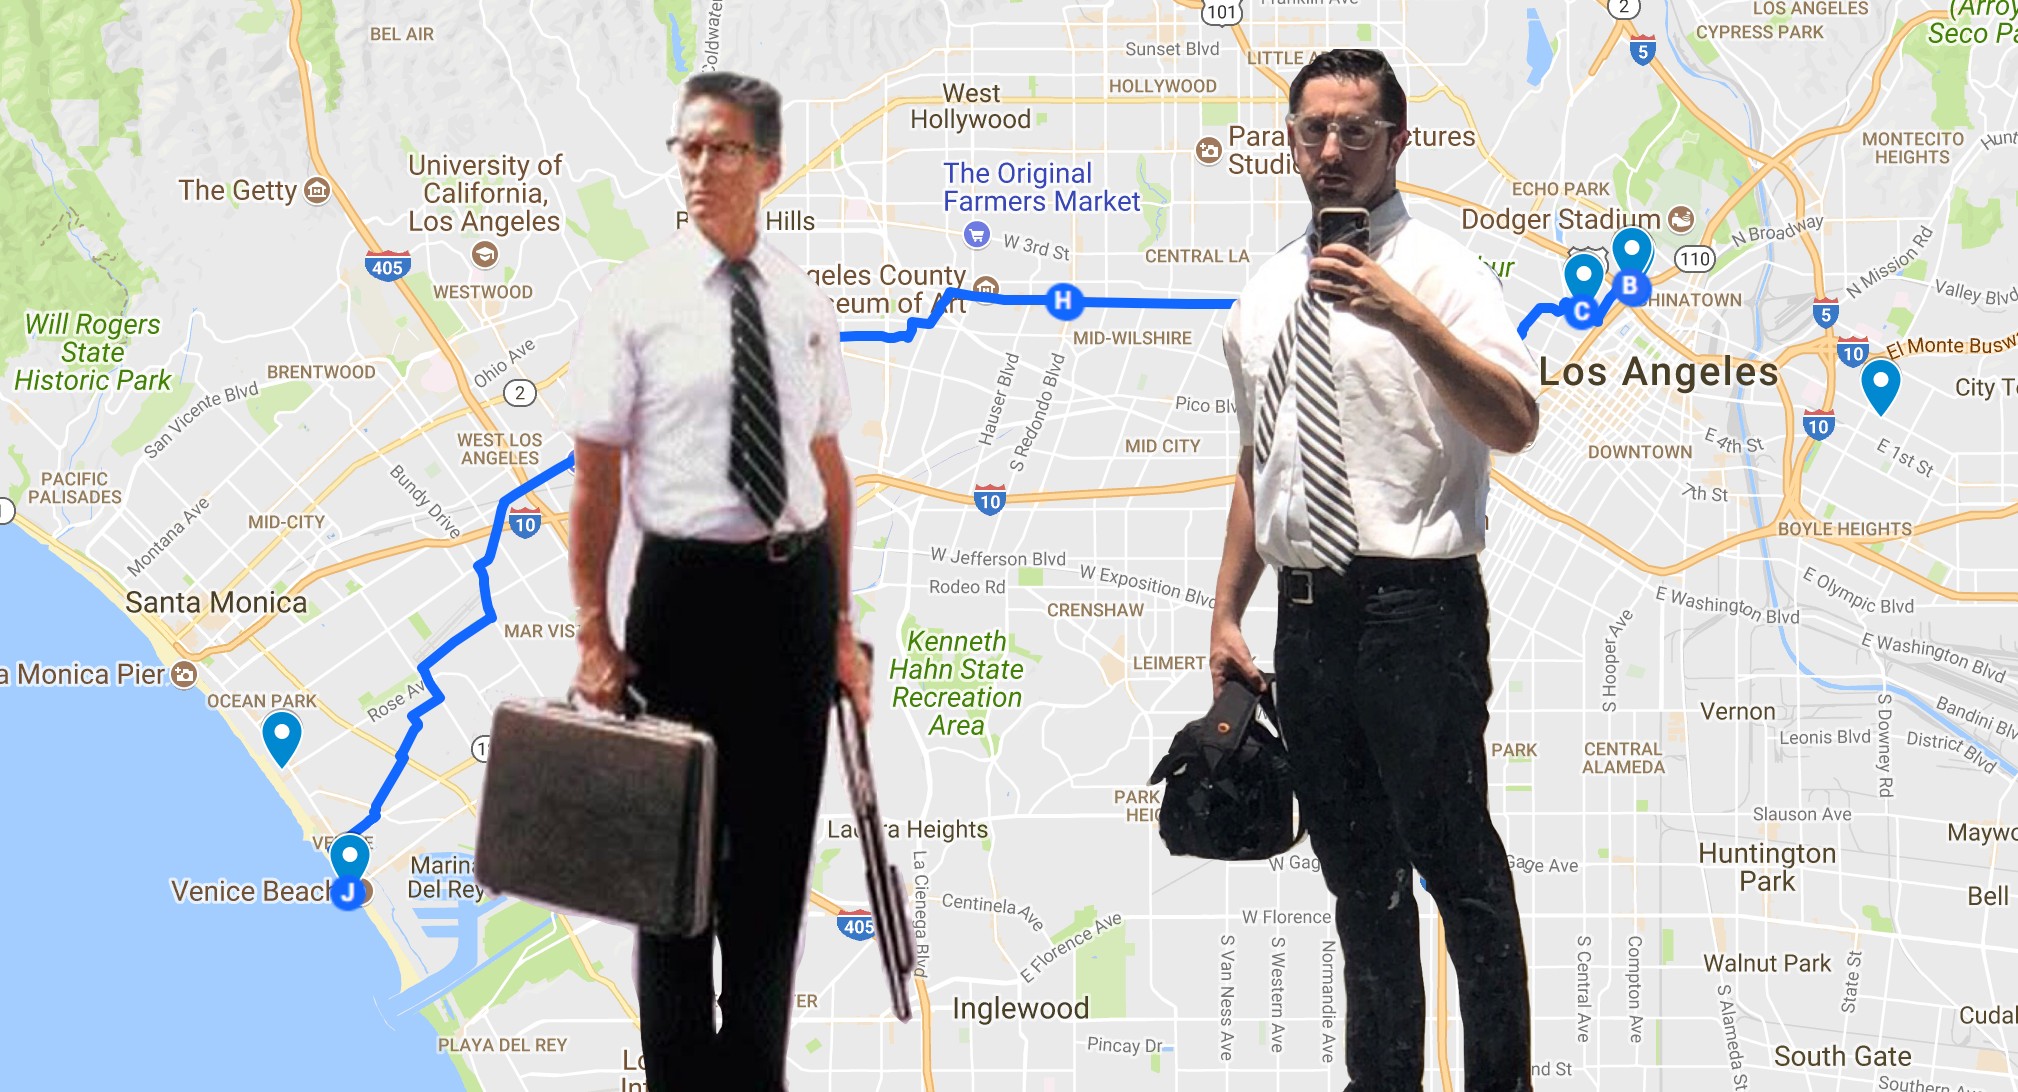 I Recreated the 20-Mile Walk from 'Falling Down' Minus the Murders